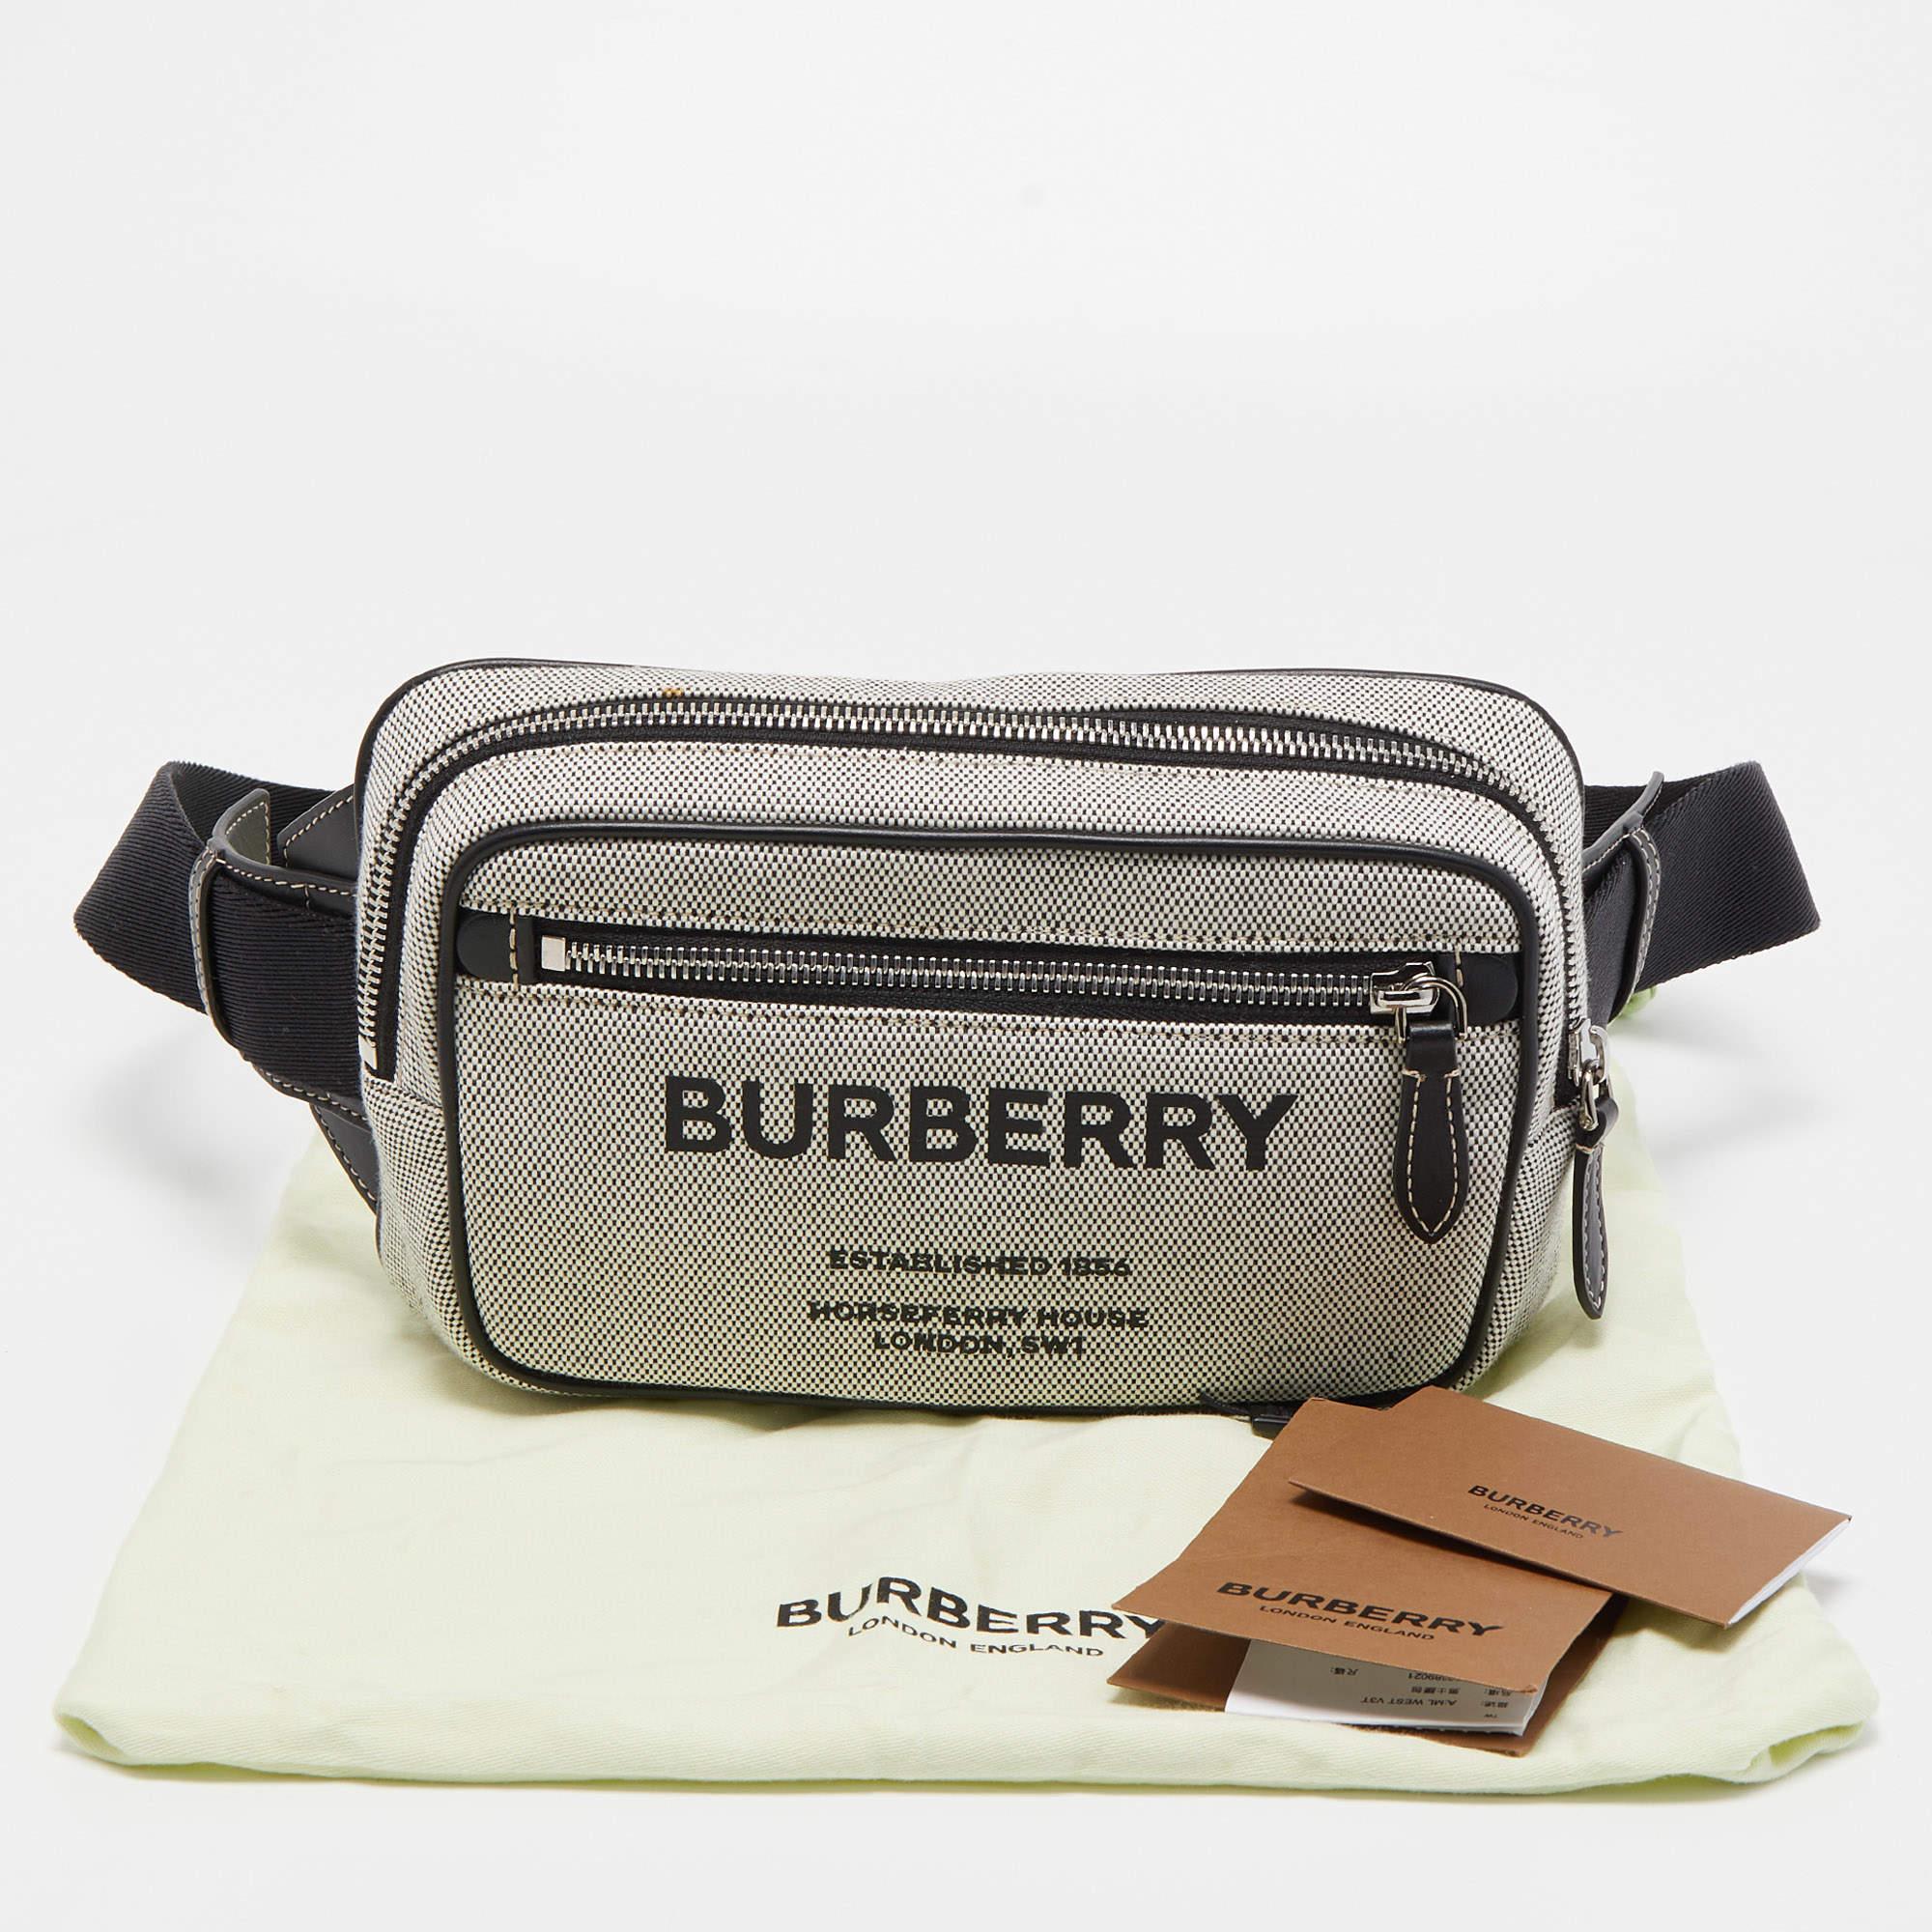 Burberry Grey/Black Canvas and Leather West Belt Bag 7